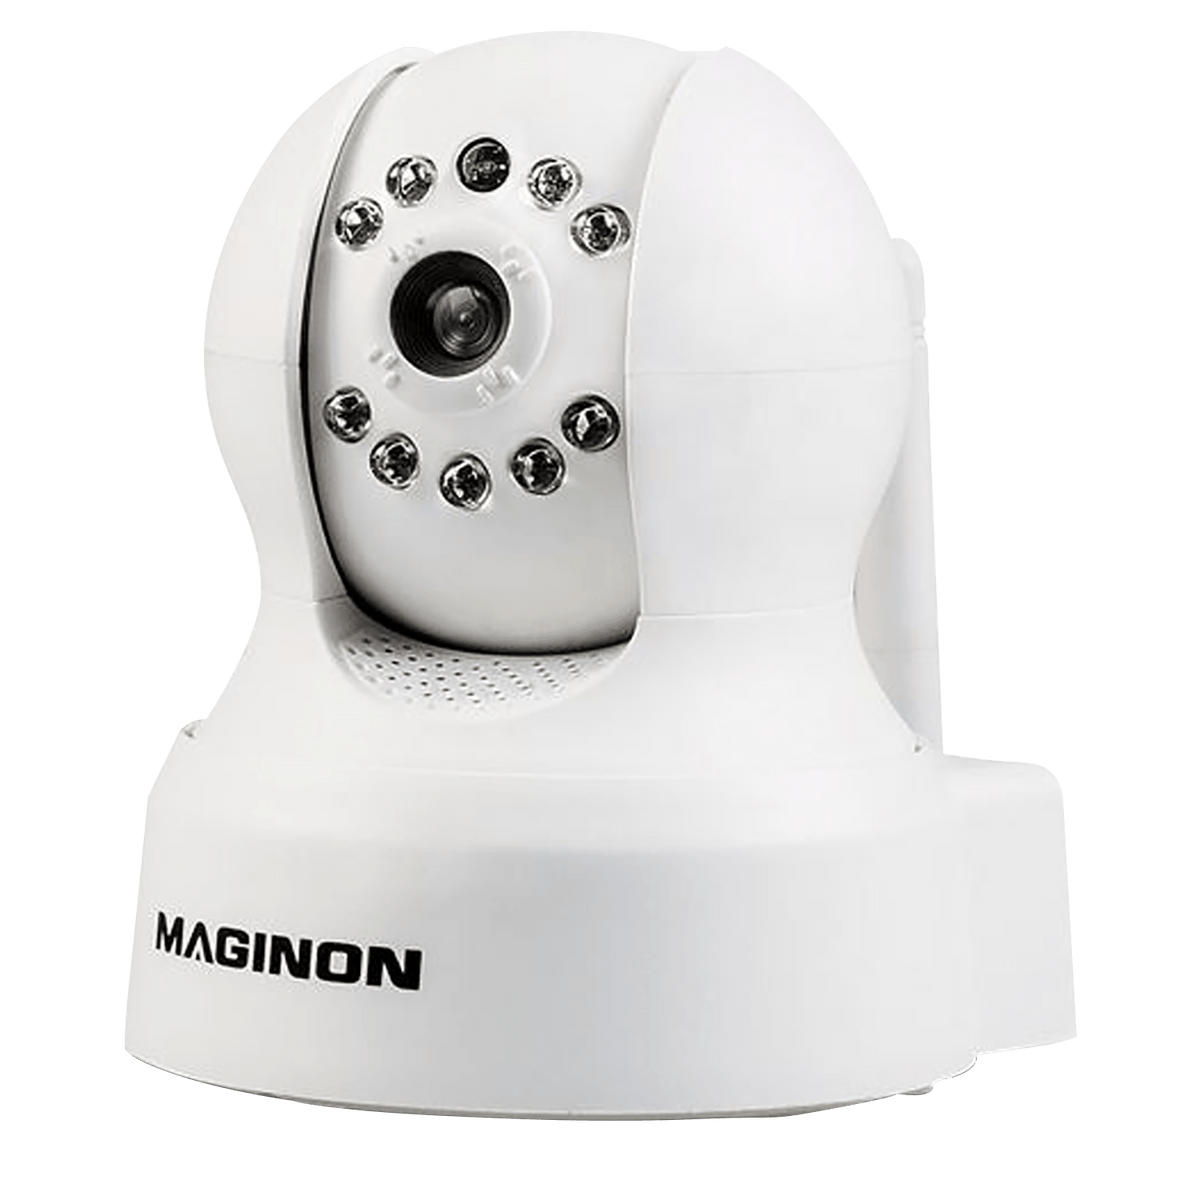 Maginon Wireless Security Camera Ipc-1a Software Download